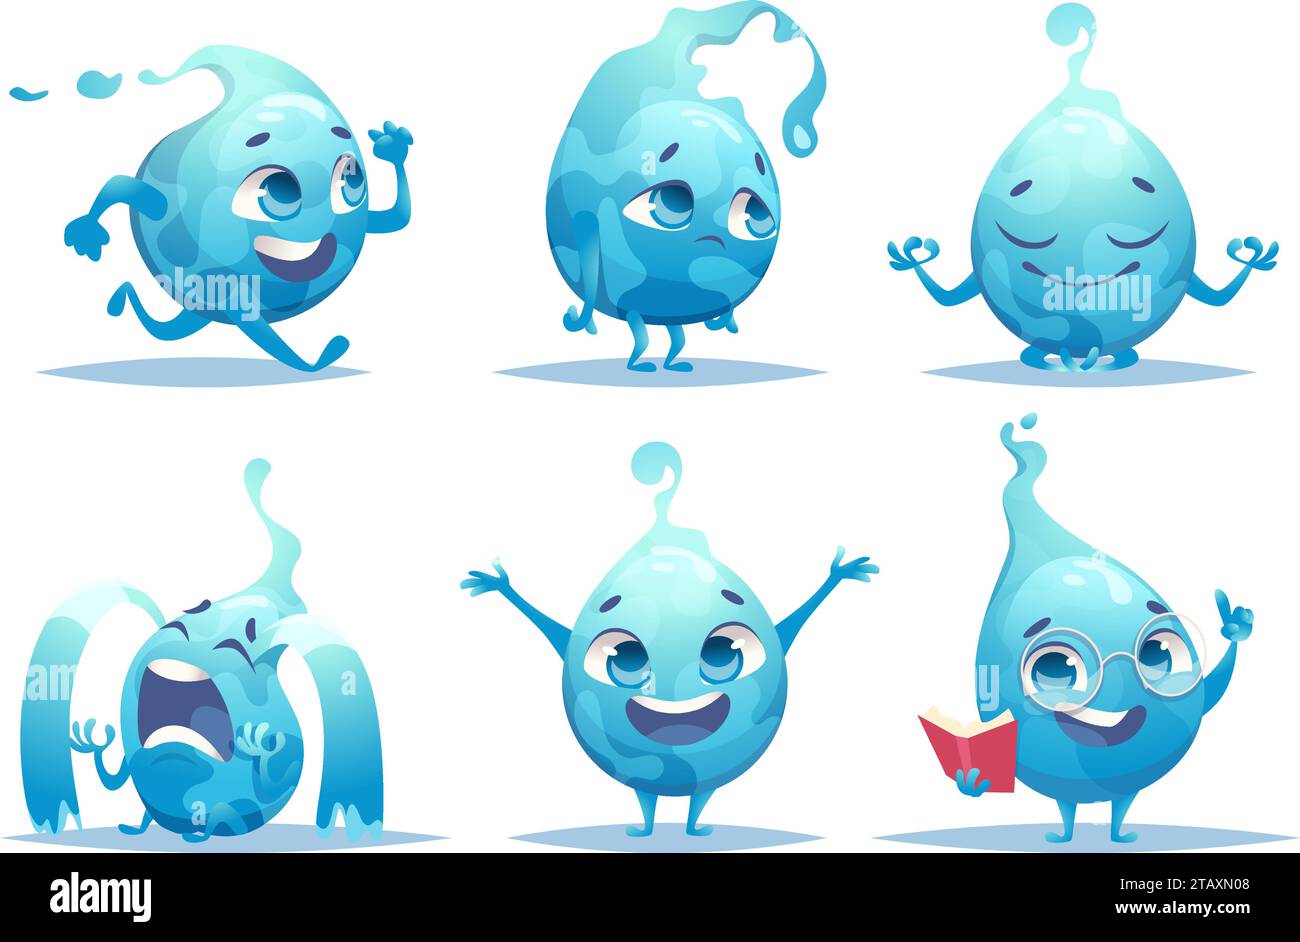 Water drops characters. Funny emoticons from liquid drops in action poses exact vector templates Stock Vector